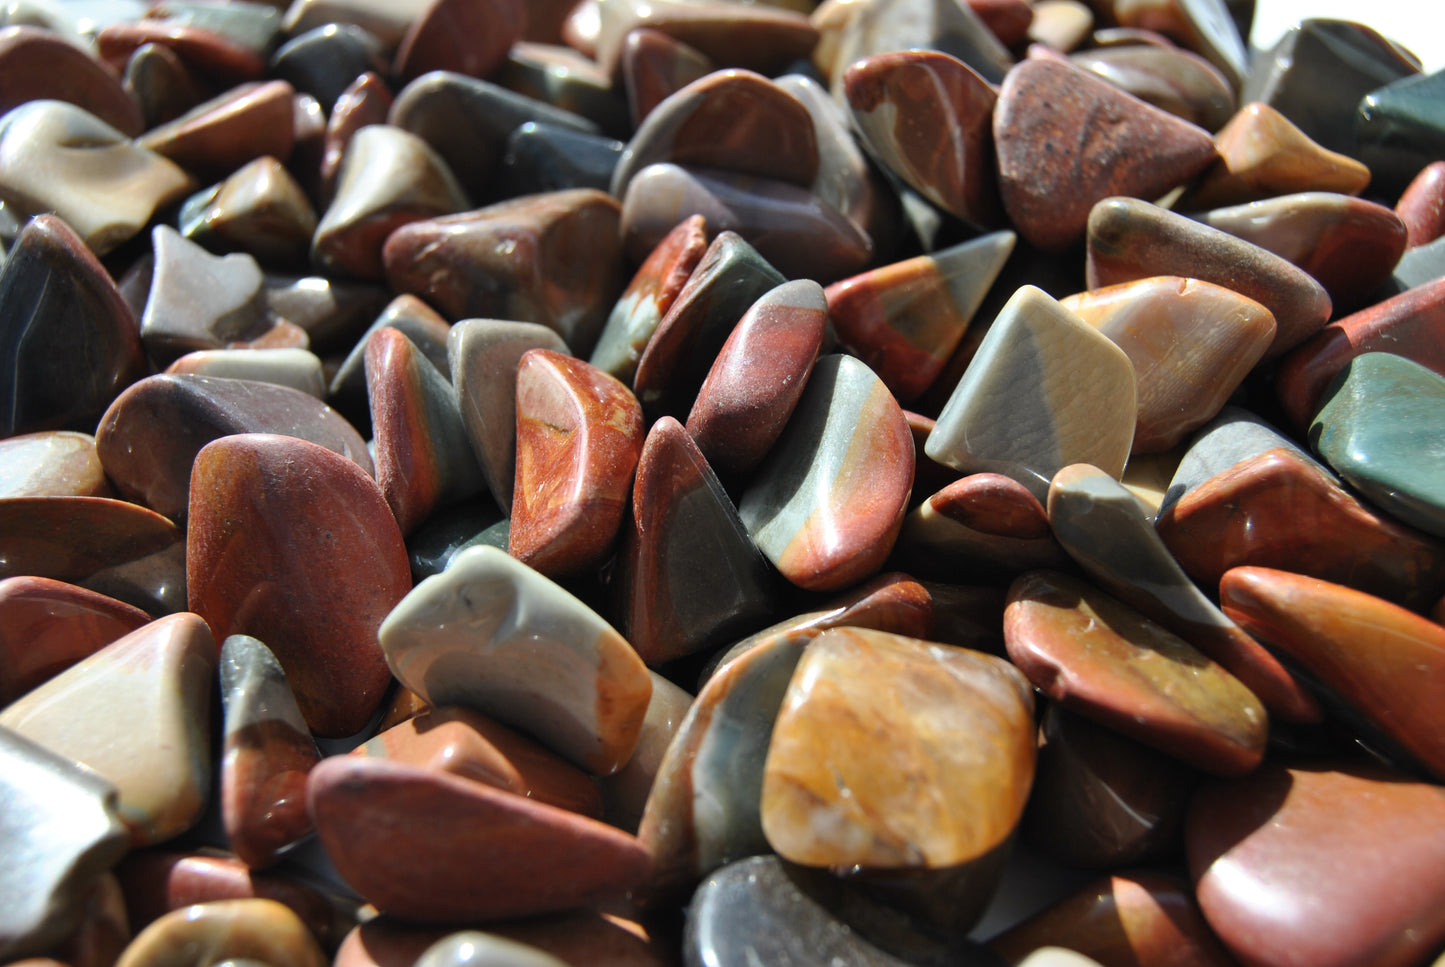 A close up view of an assortment of tumbled desert jasper stones. The stones vary in hues of red, orange, blue and brown.